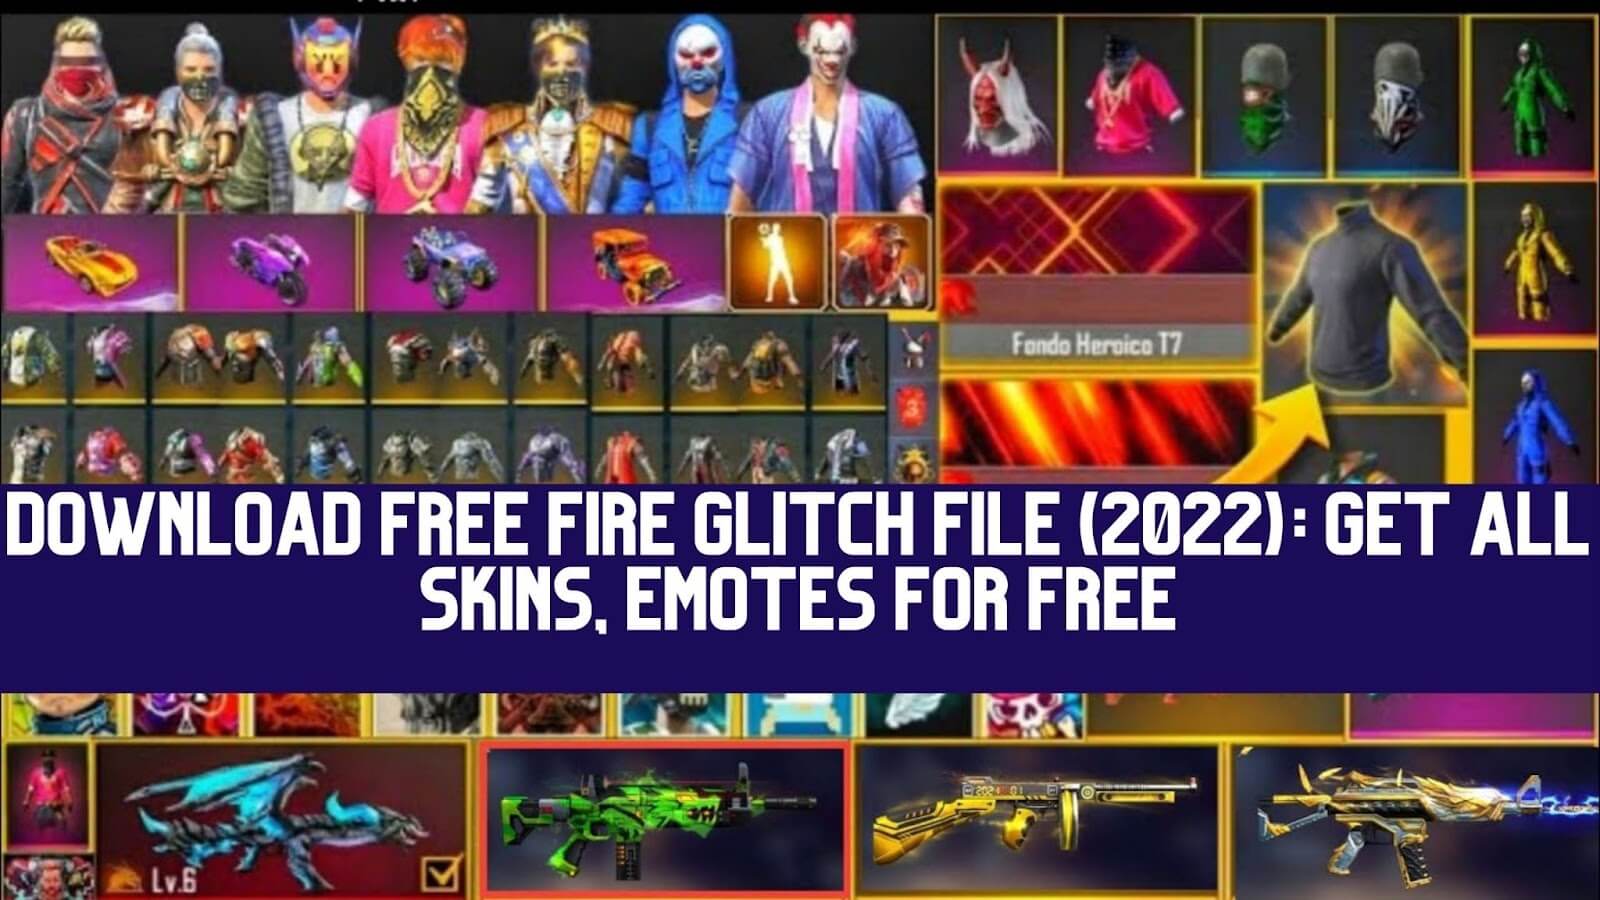 Sigma Free Fire Apk Download 280 MB Sigma Game Free for Android iOS   Very Useful  OnlineProsess